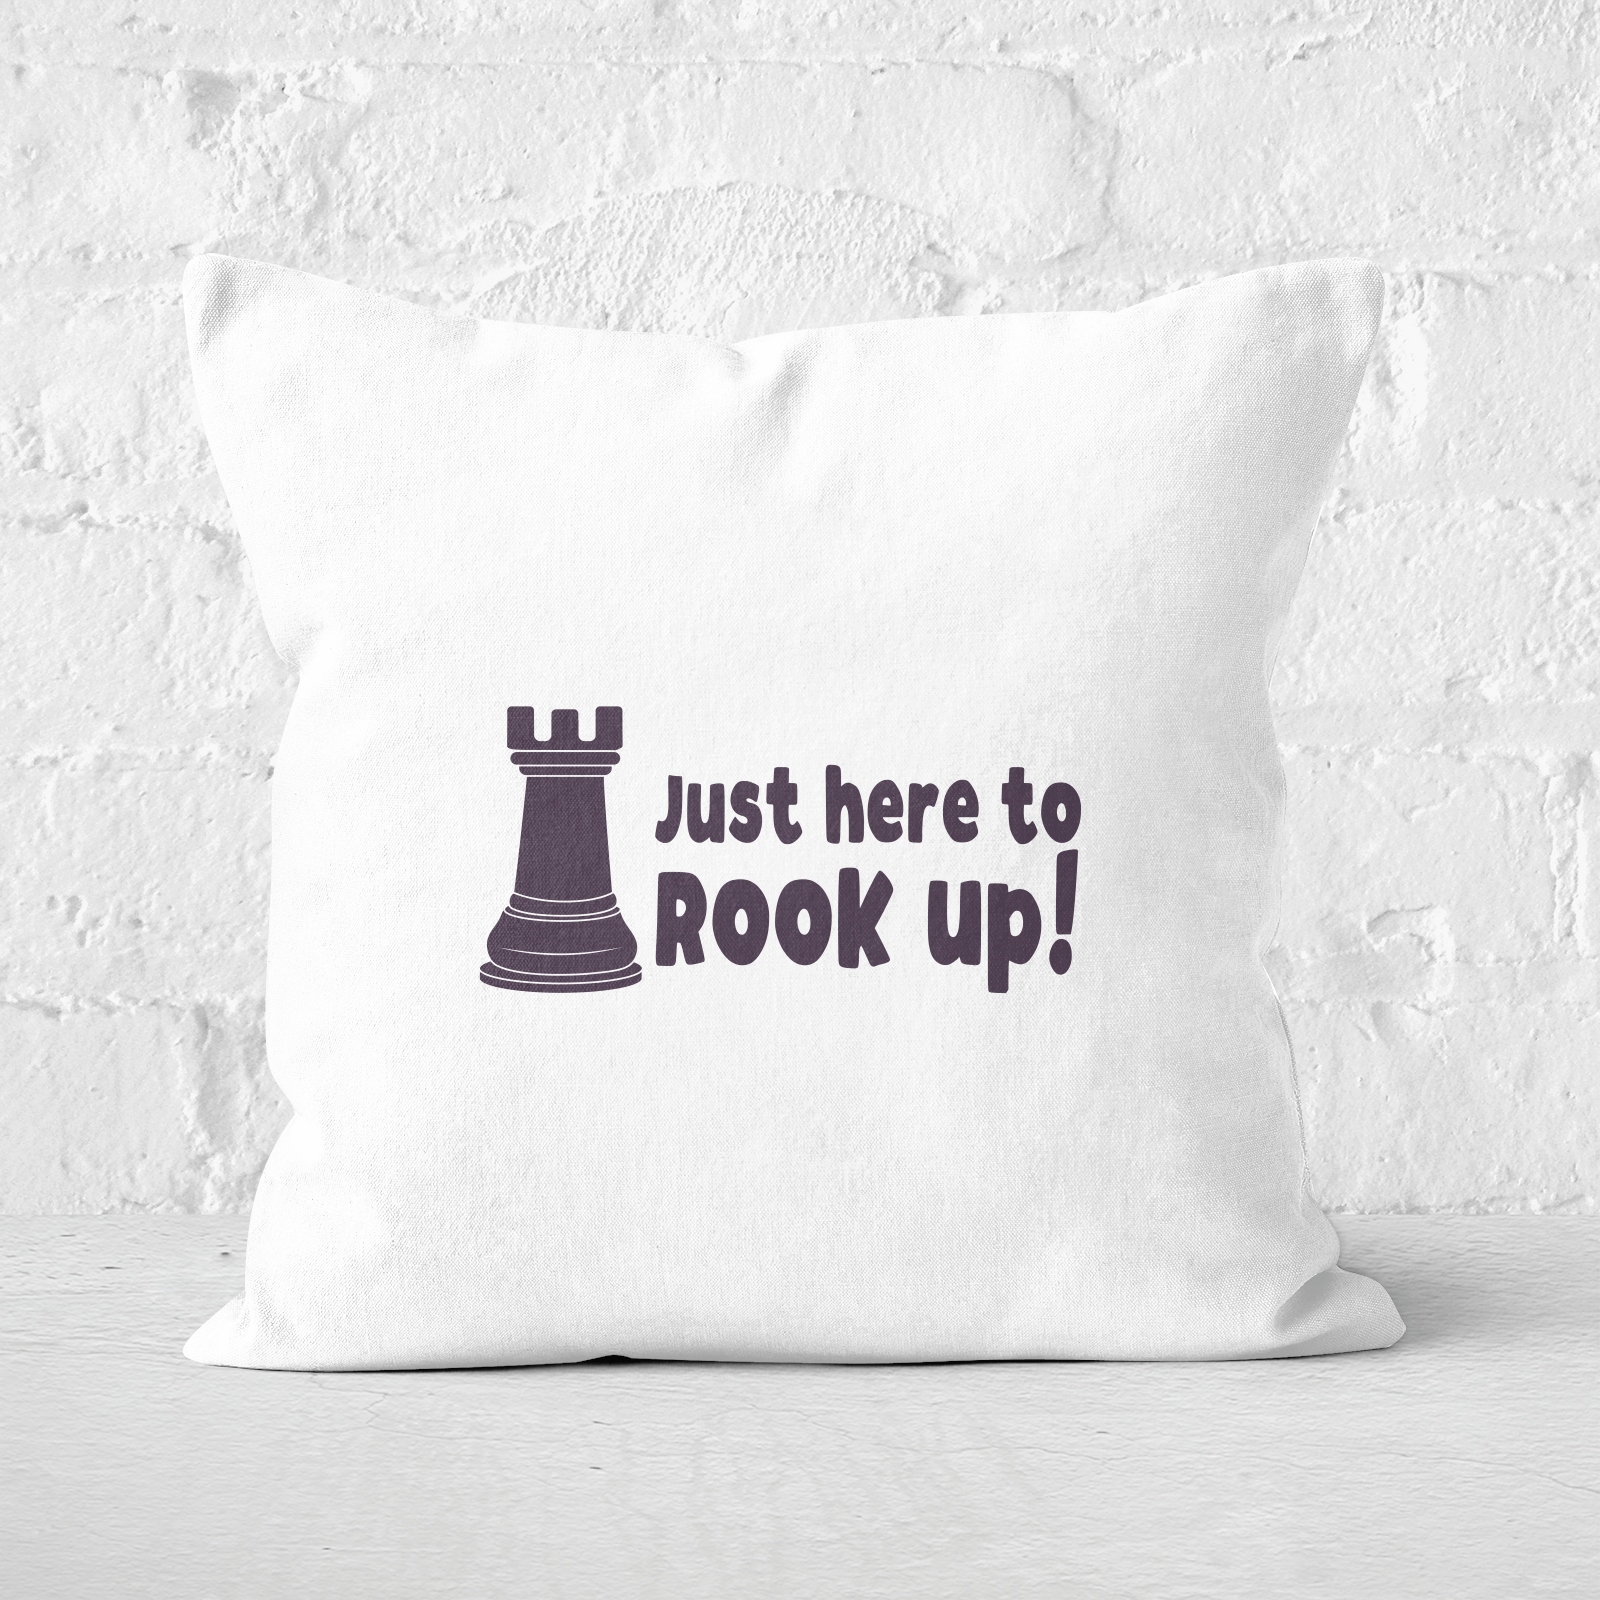 Just Here To Rook Up! Square Cushion - 60x60cm - Soft Touch